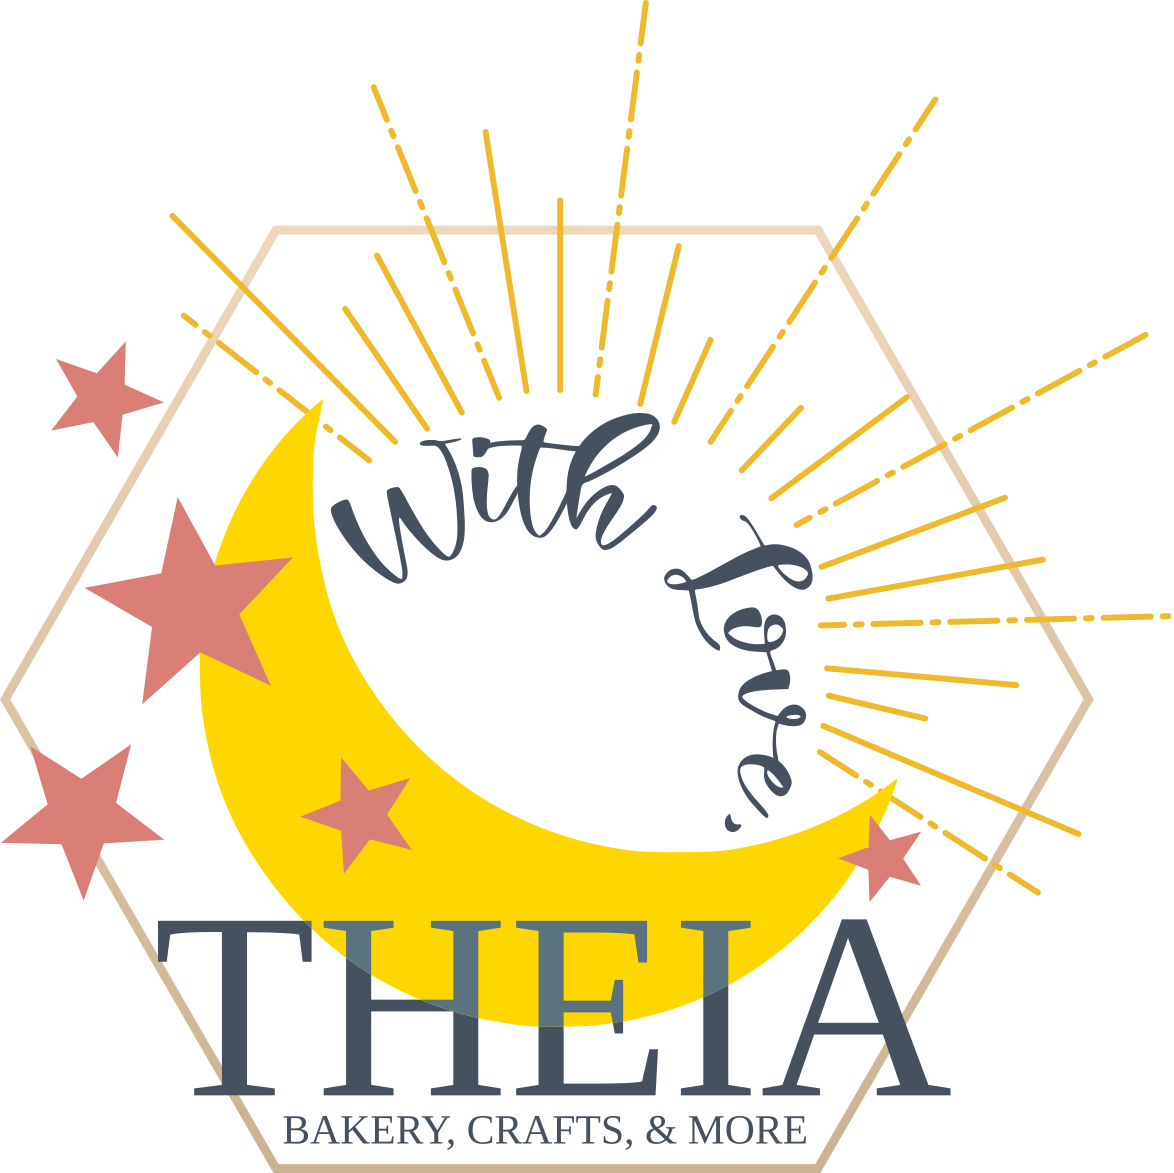 With Love, Theia